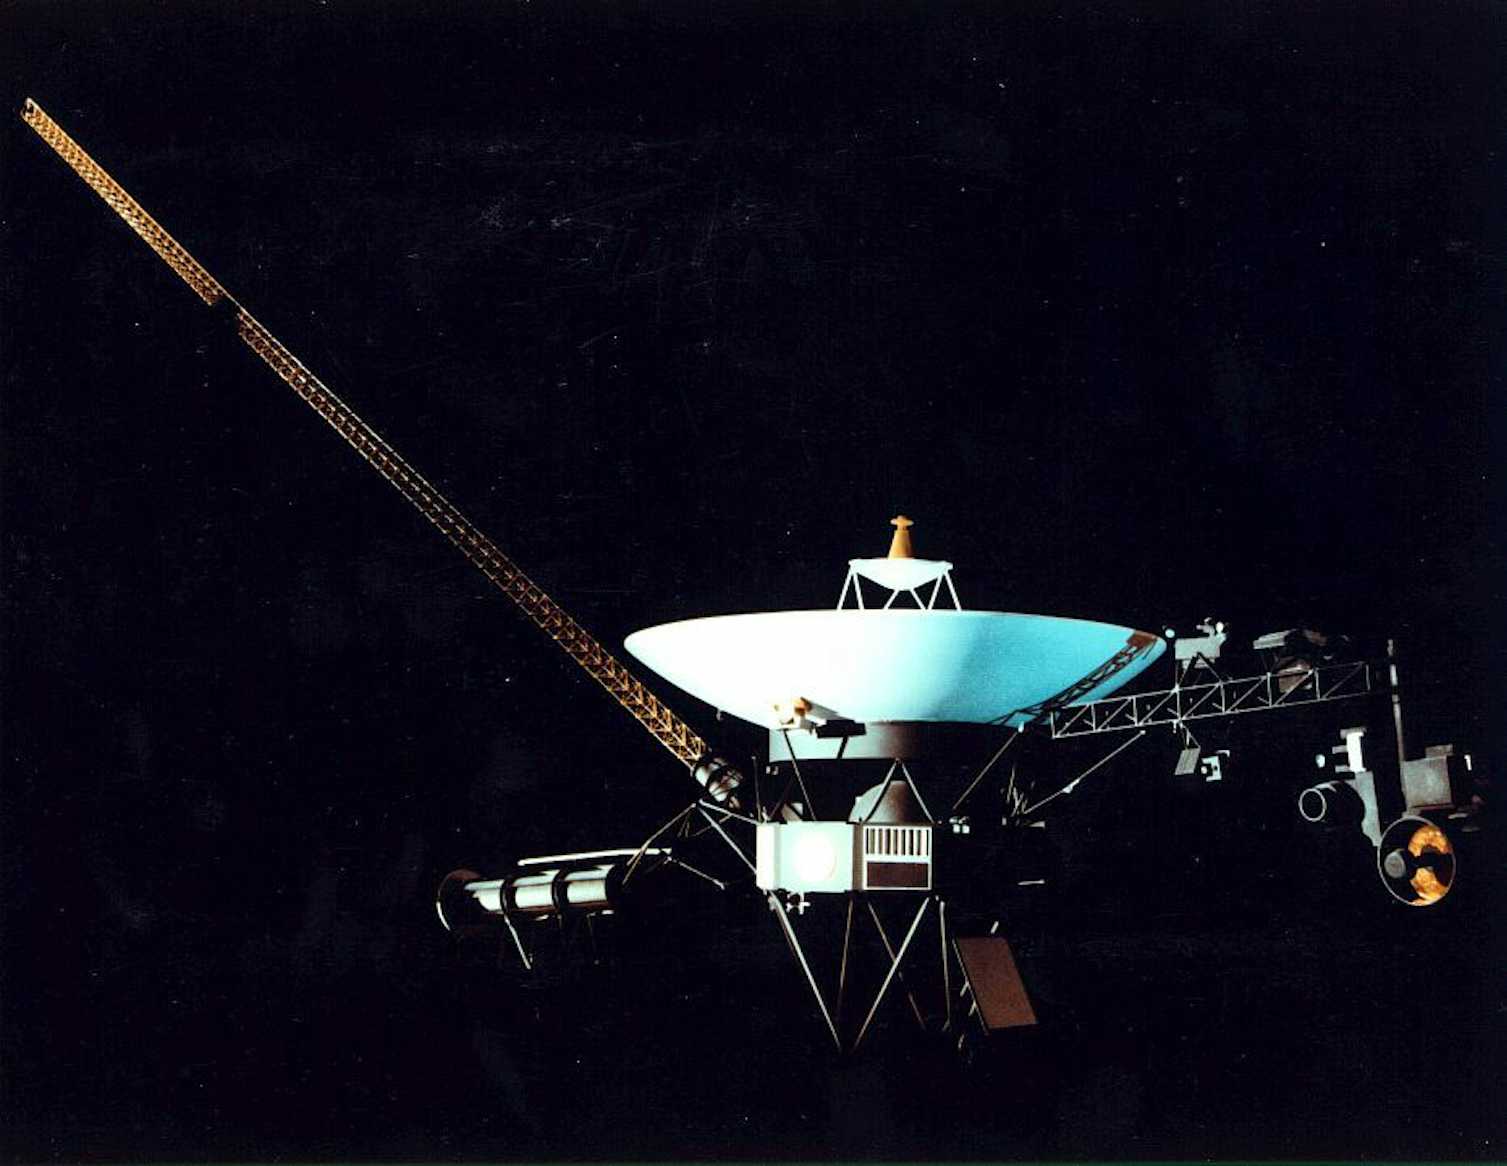 space probes voyager 1 and 2